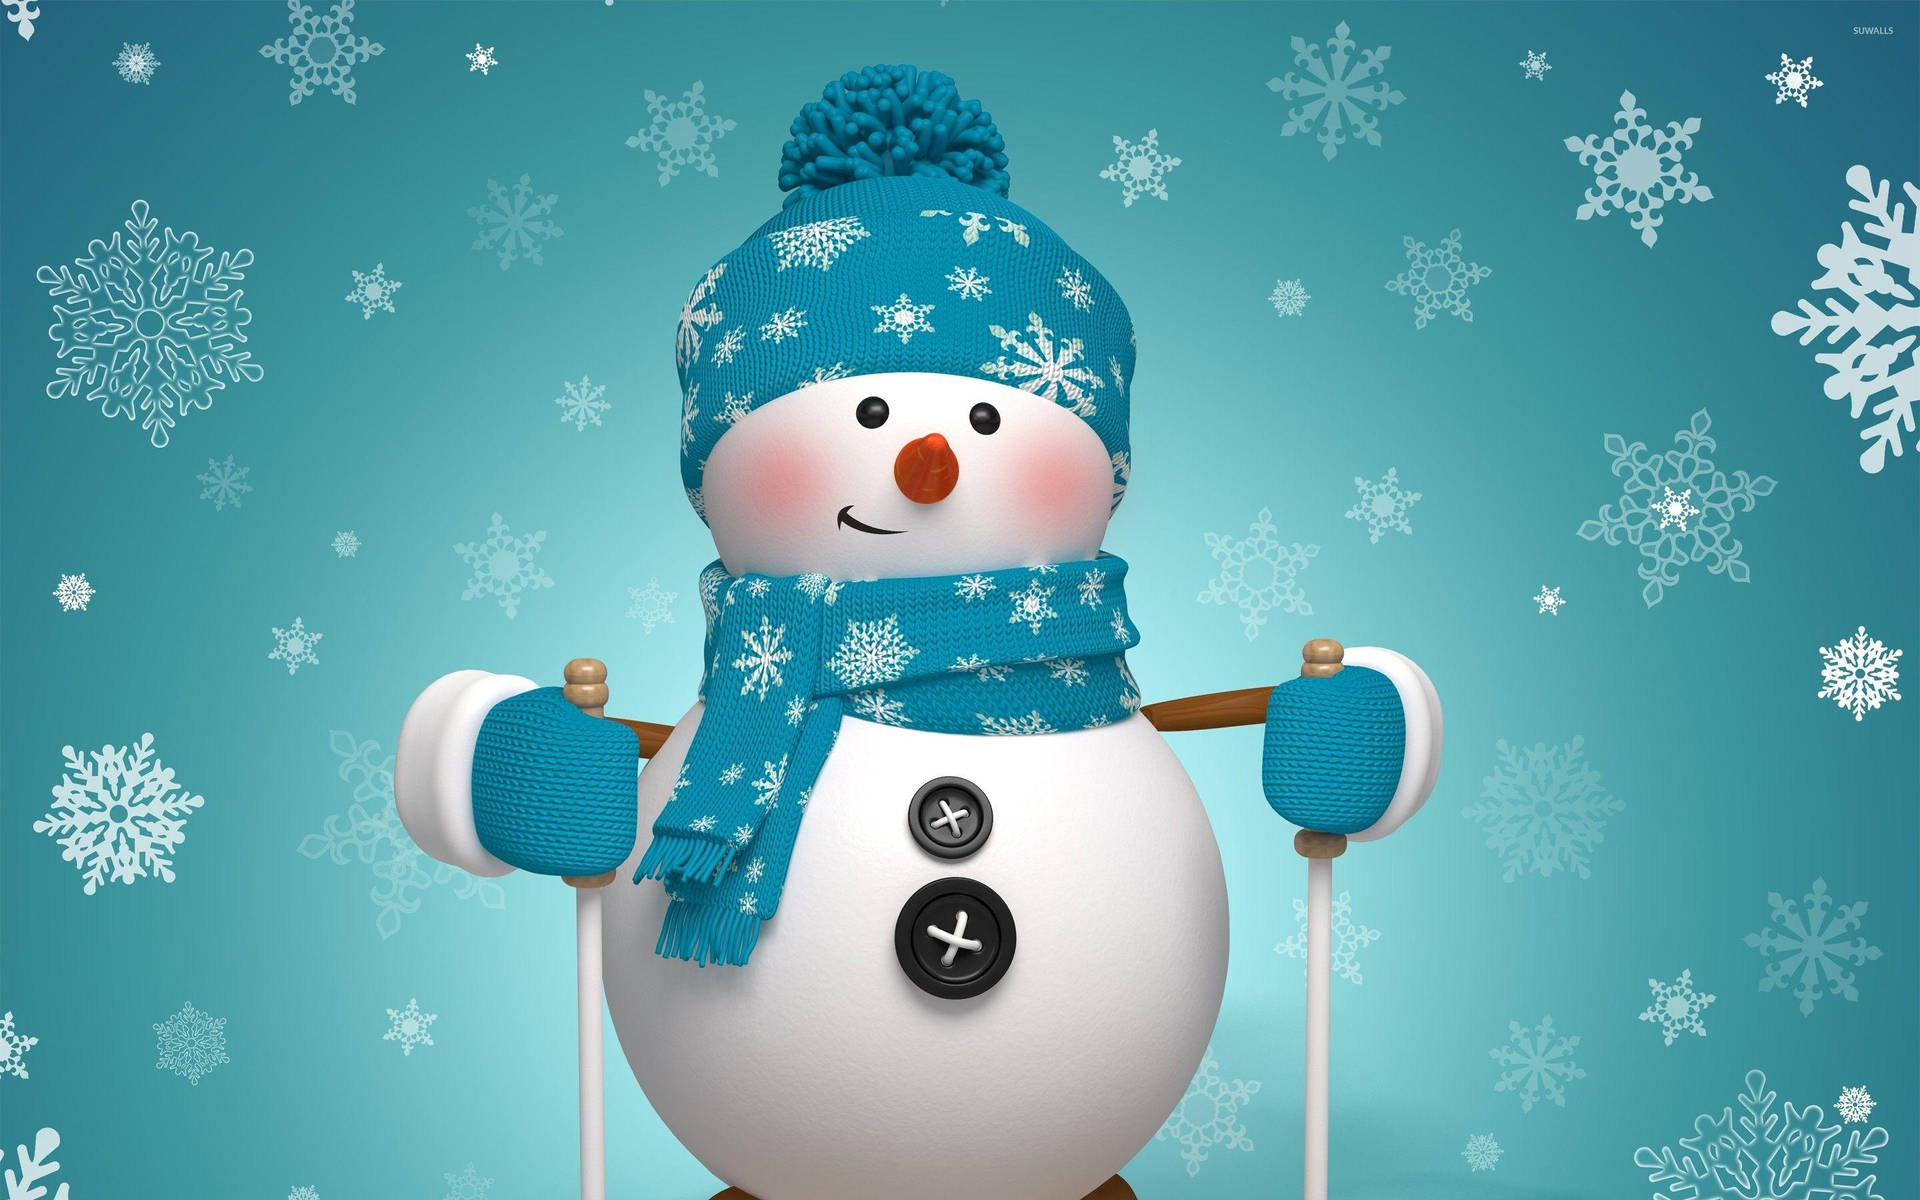 "Enjoy a snowy winter day with these cute snowmen!" Wallpaper